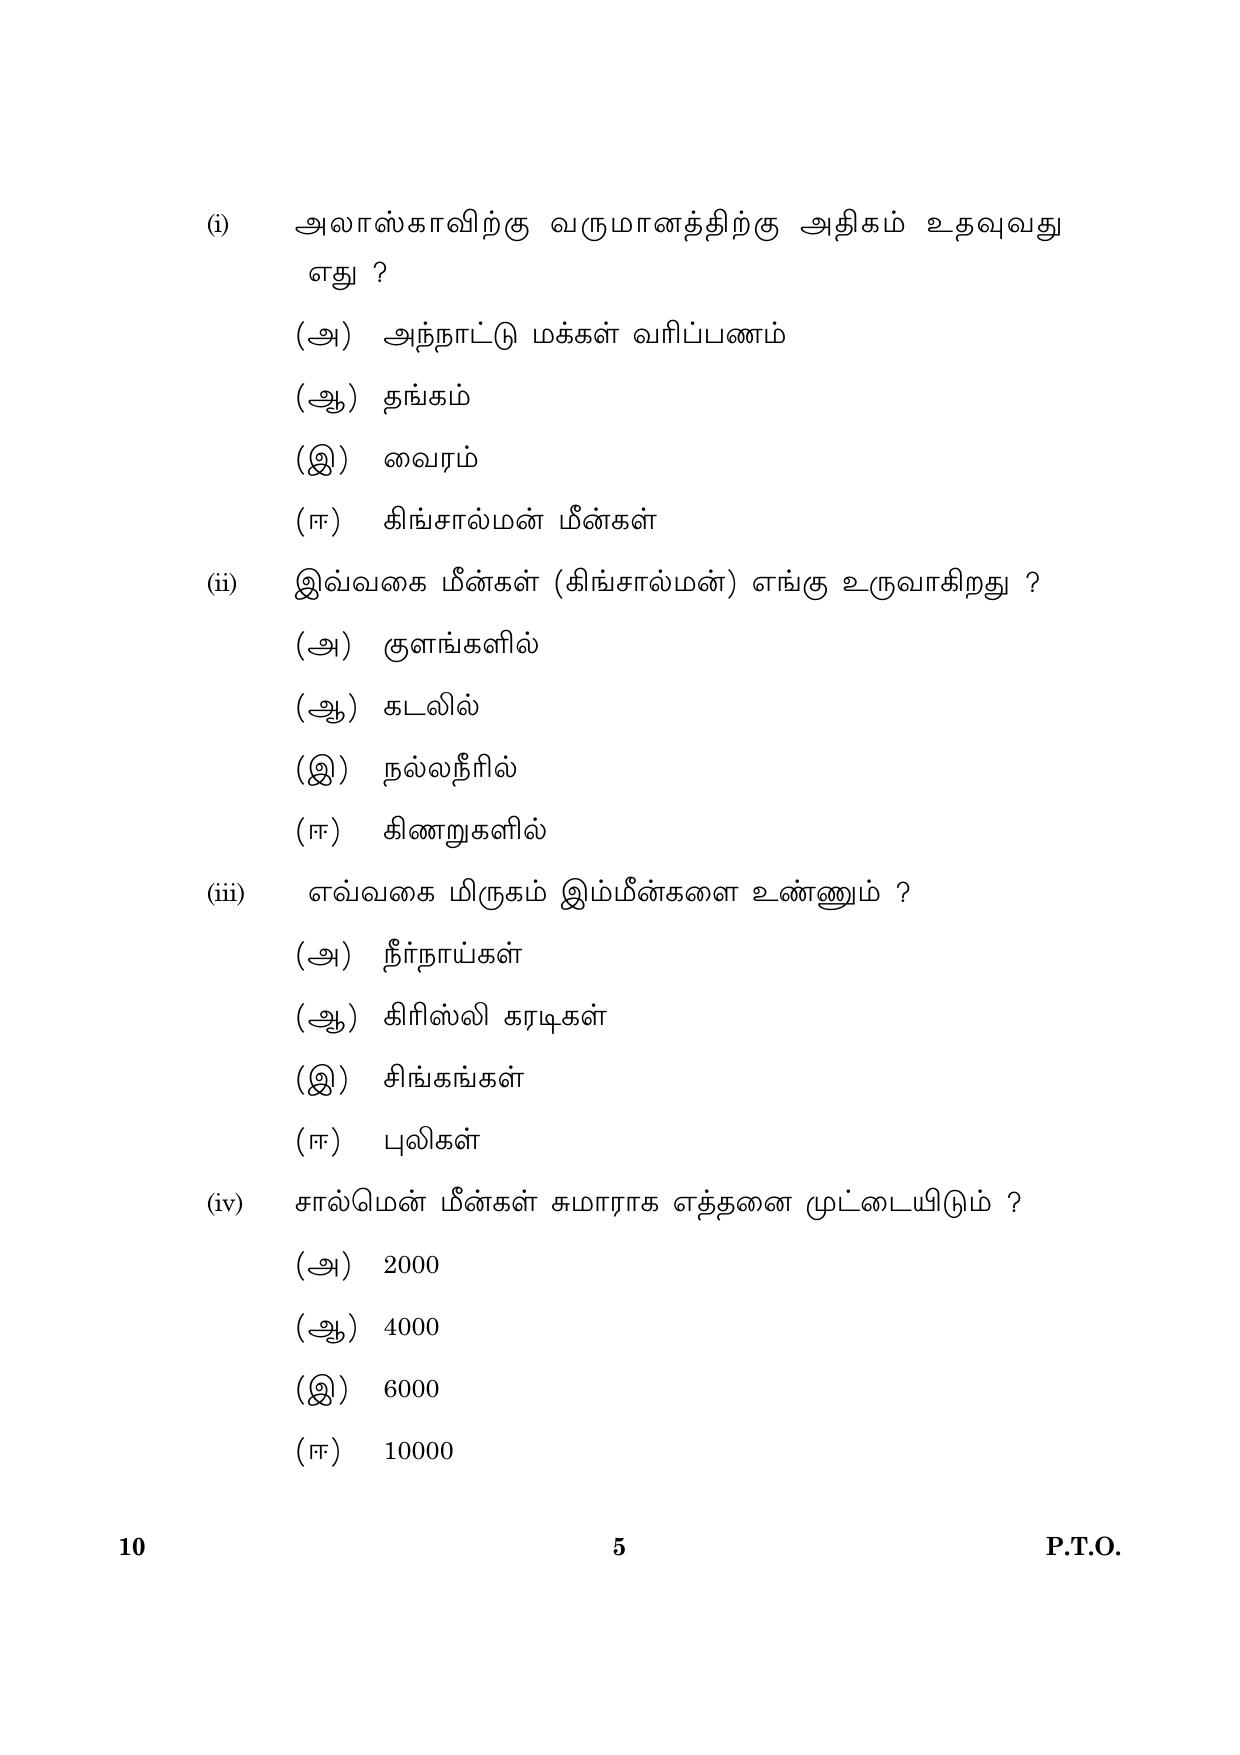 CBSE Class 10 010 Tamil 2016 Question Paper - Page 5